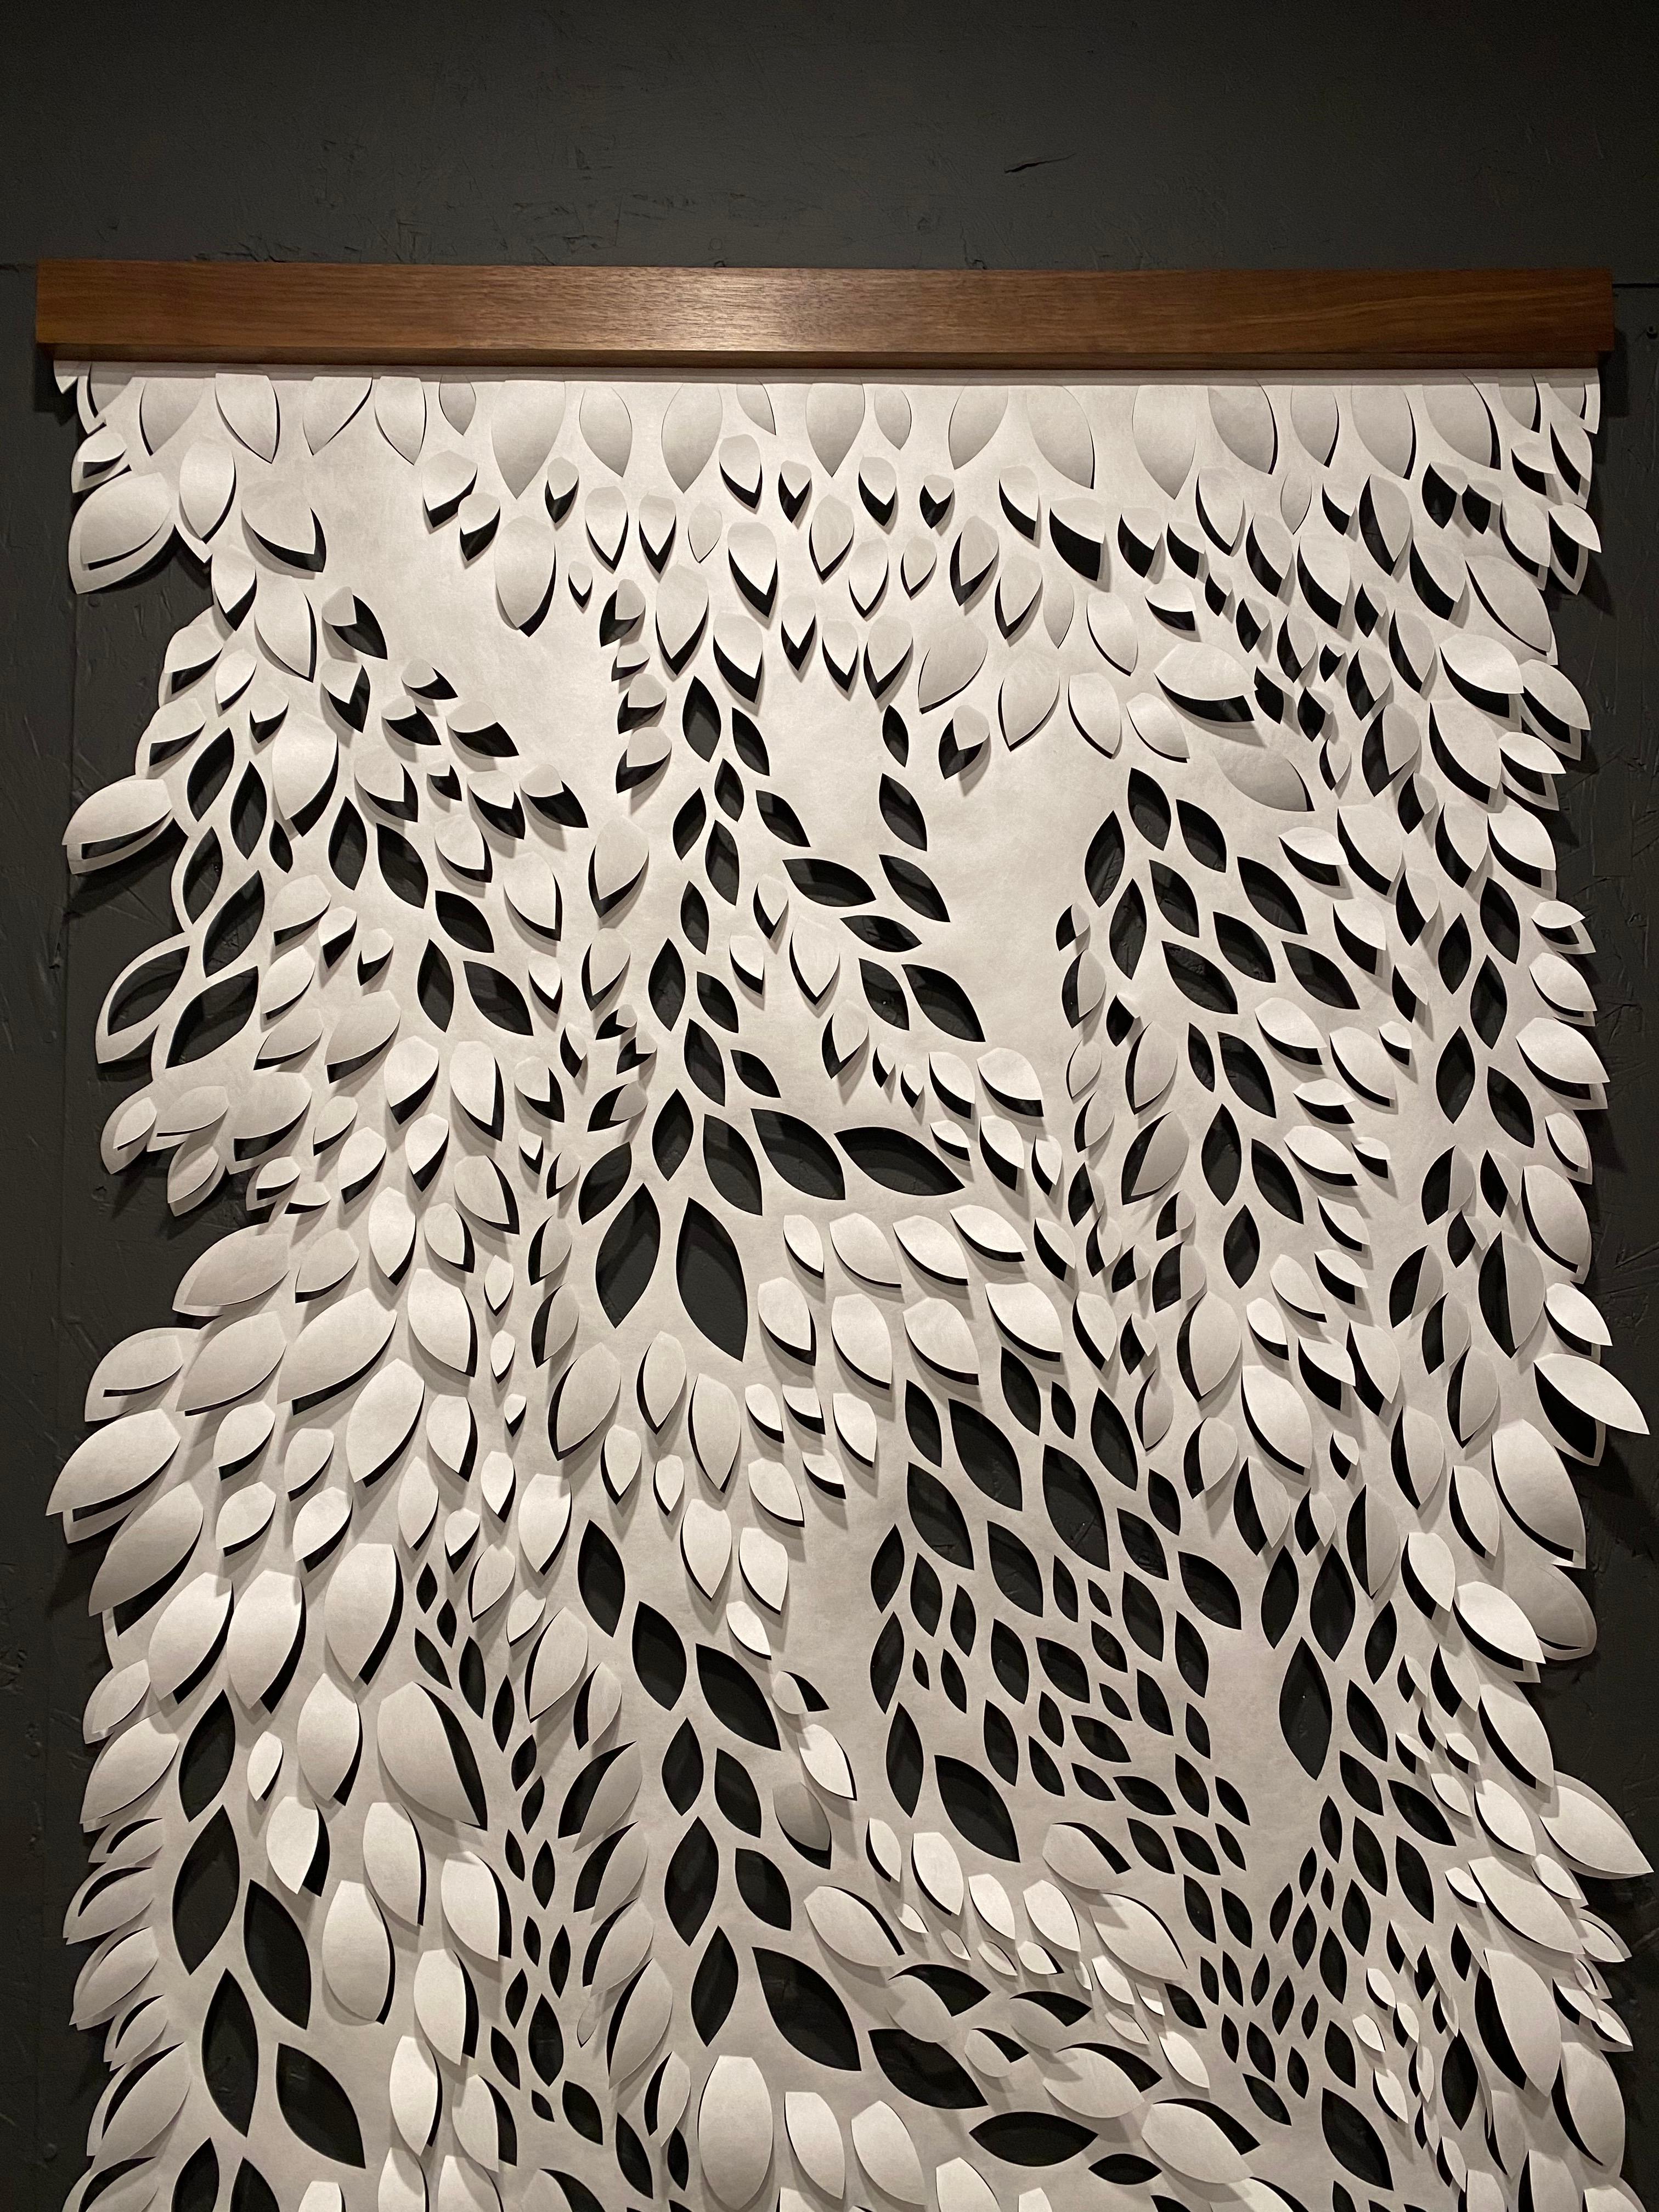 Hand-cut Paper Scroll Free Edge with Stars, Tyvek Sculptural Wall Hangings 60x36 - Contemporary Sculpture by Summer J. Hart